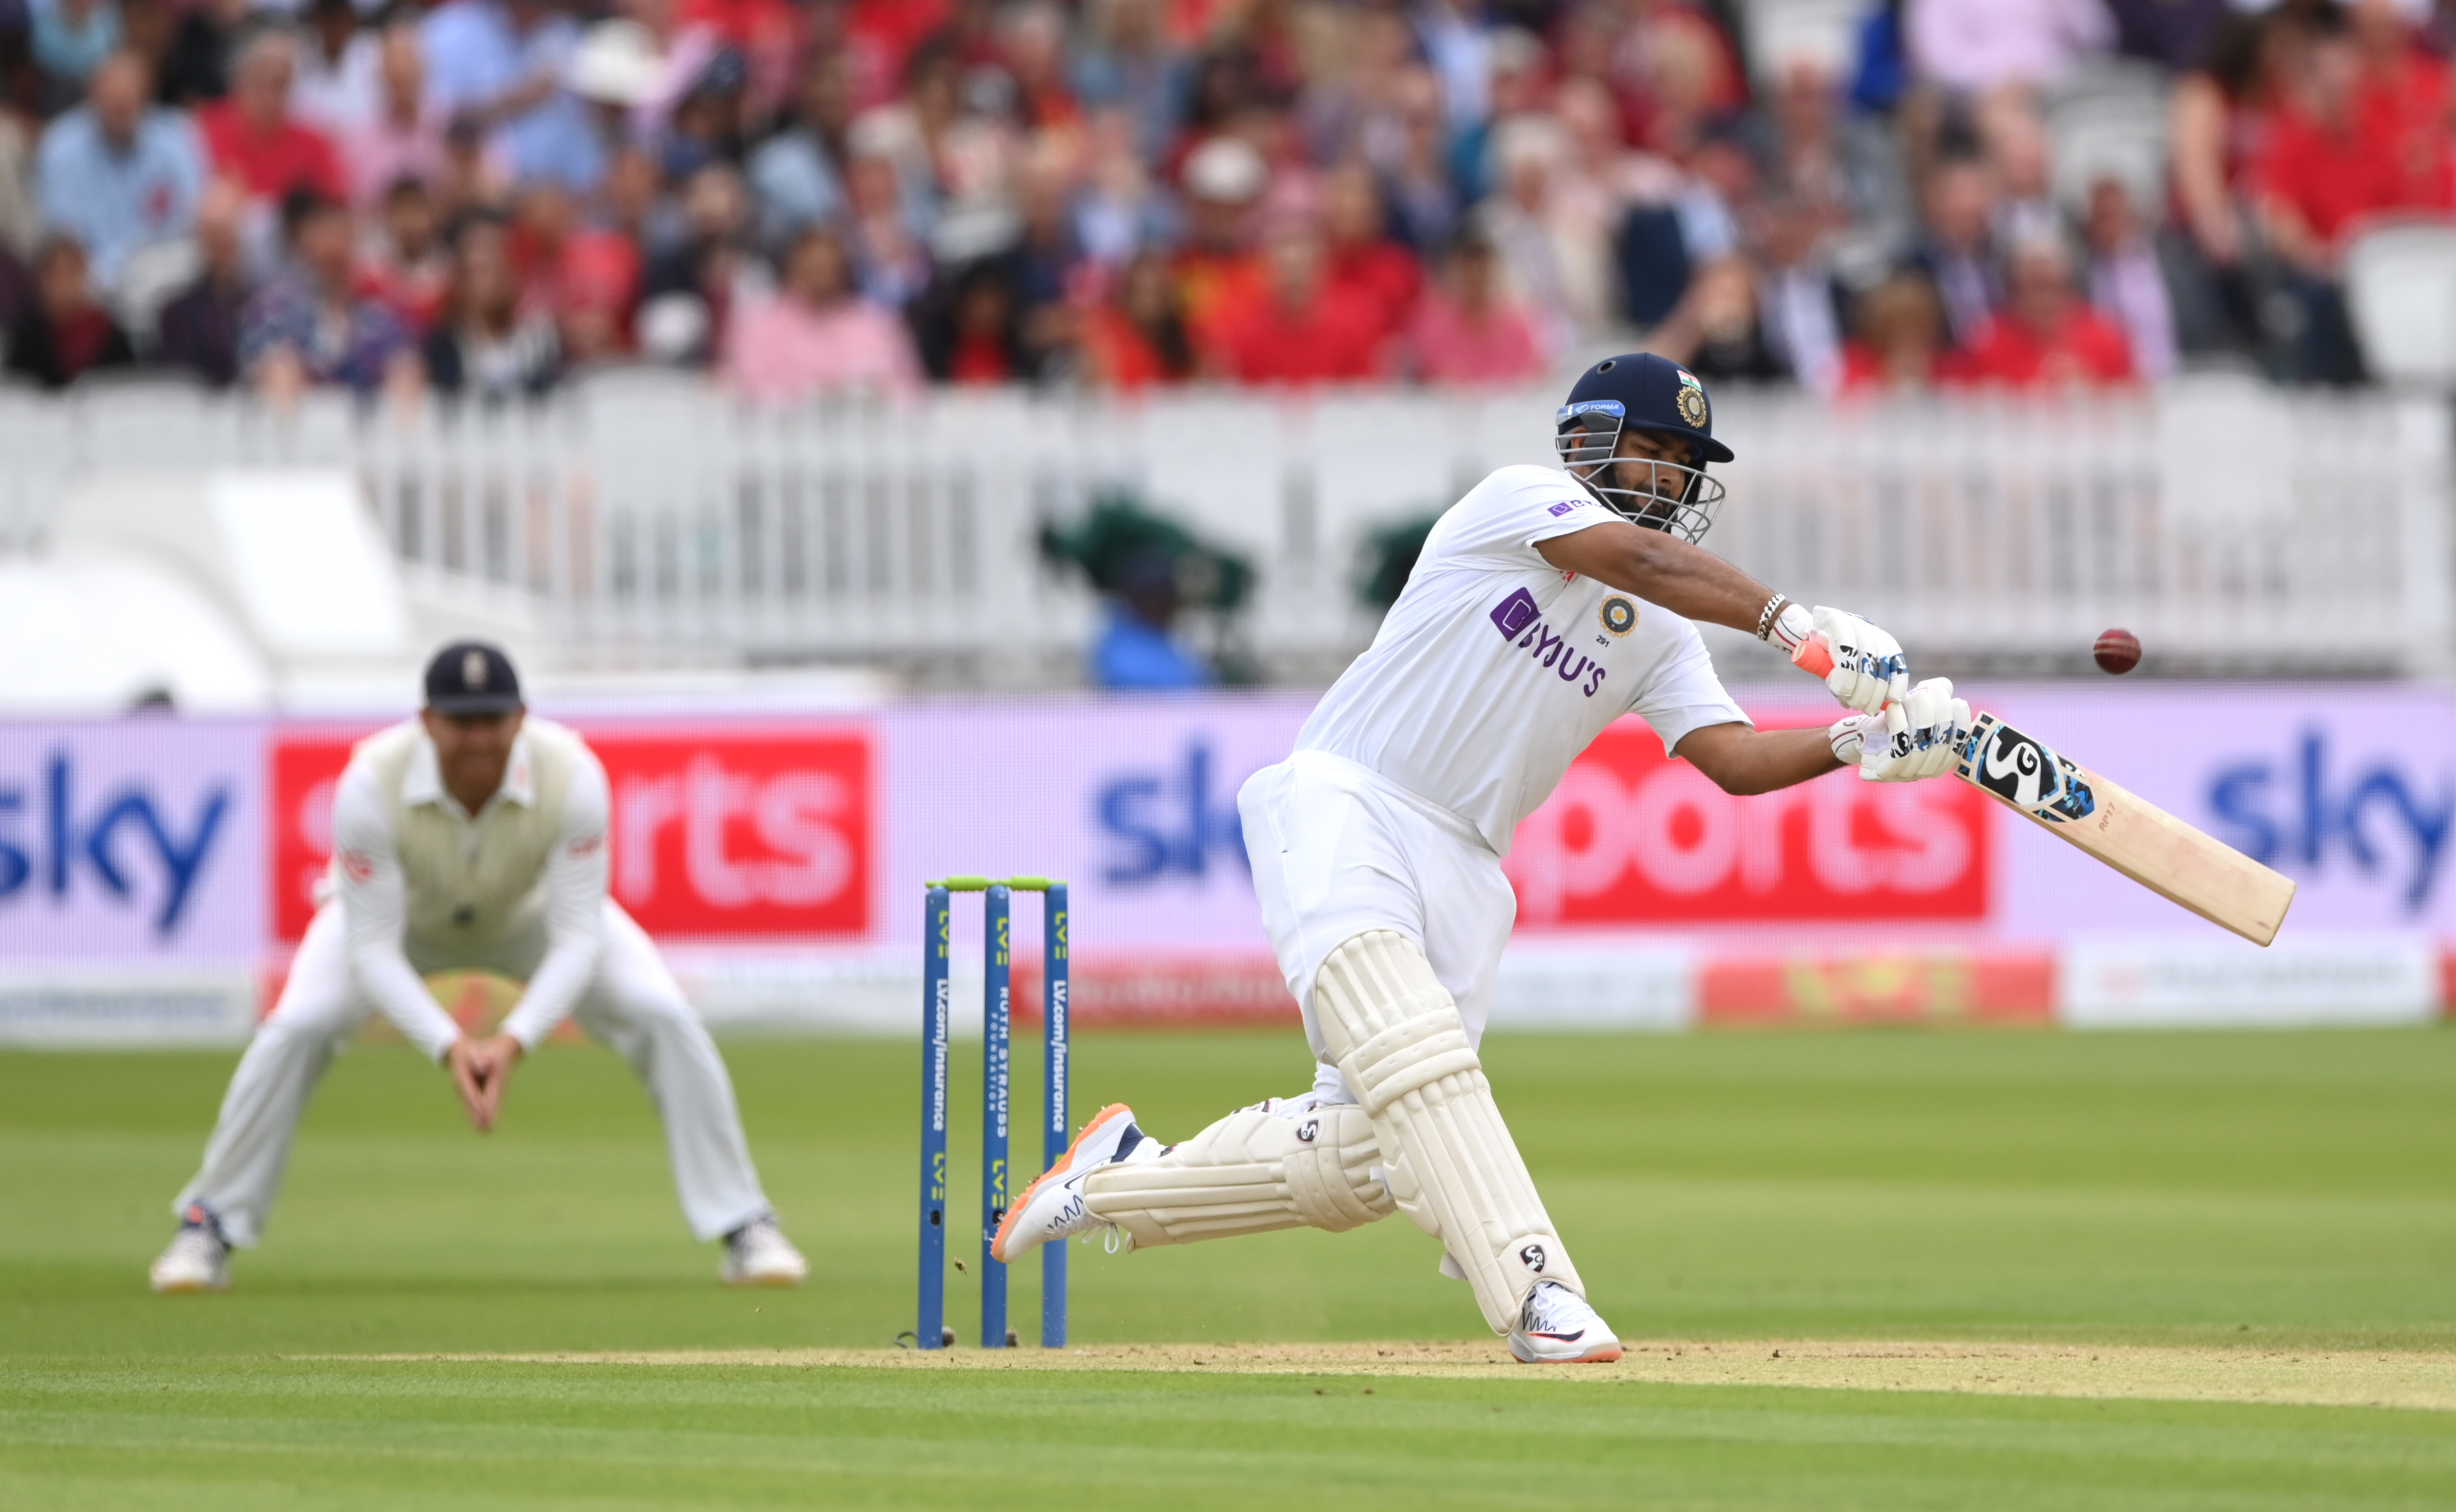 ENG vs IND | Lord's Day 2 Talking Points - Pant's crucial hand, Wood and Curran's ineffectiveness and Sibley's dry run